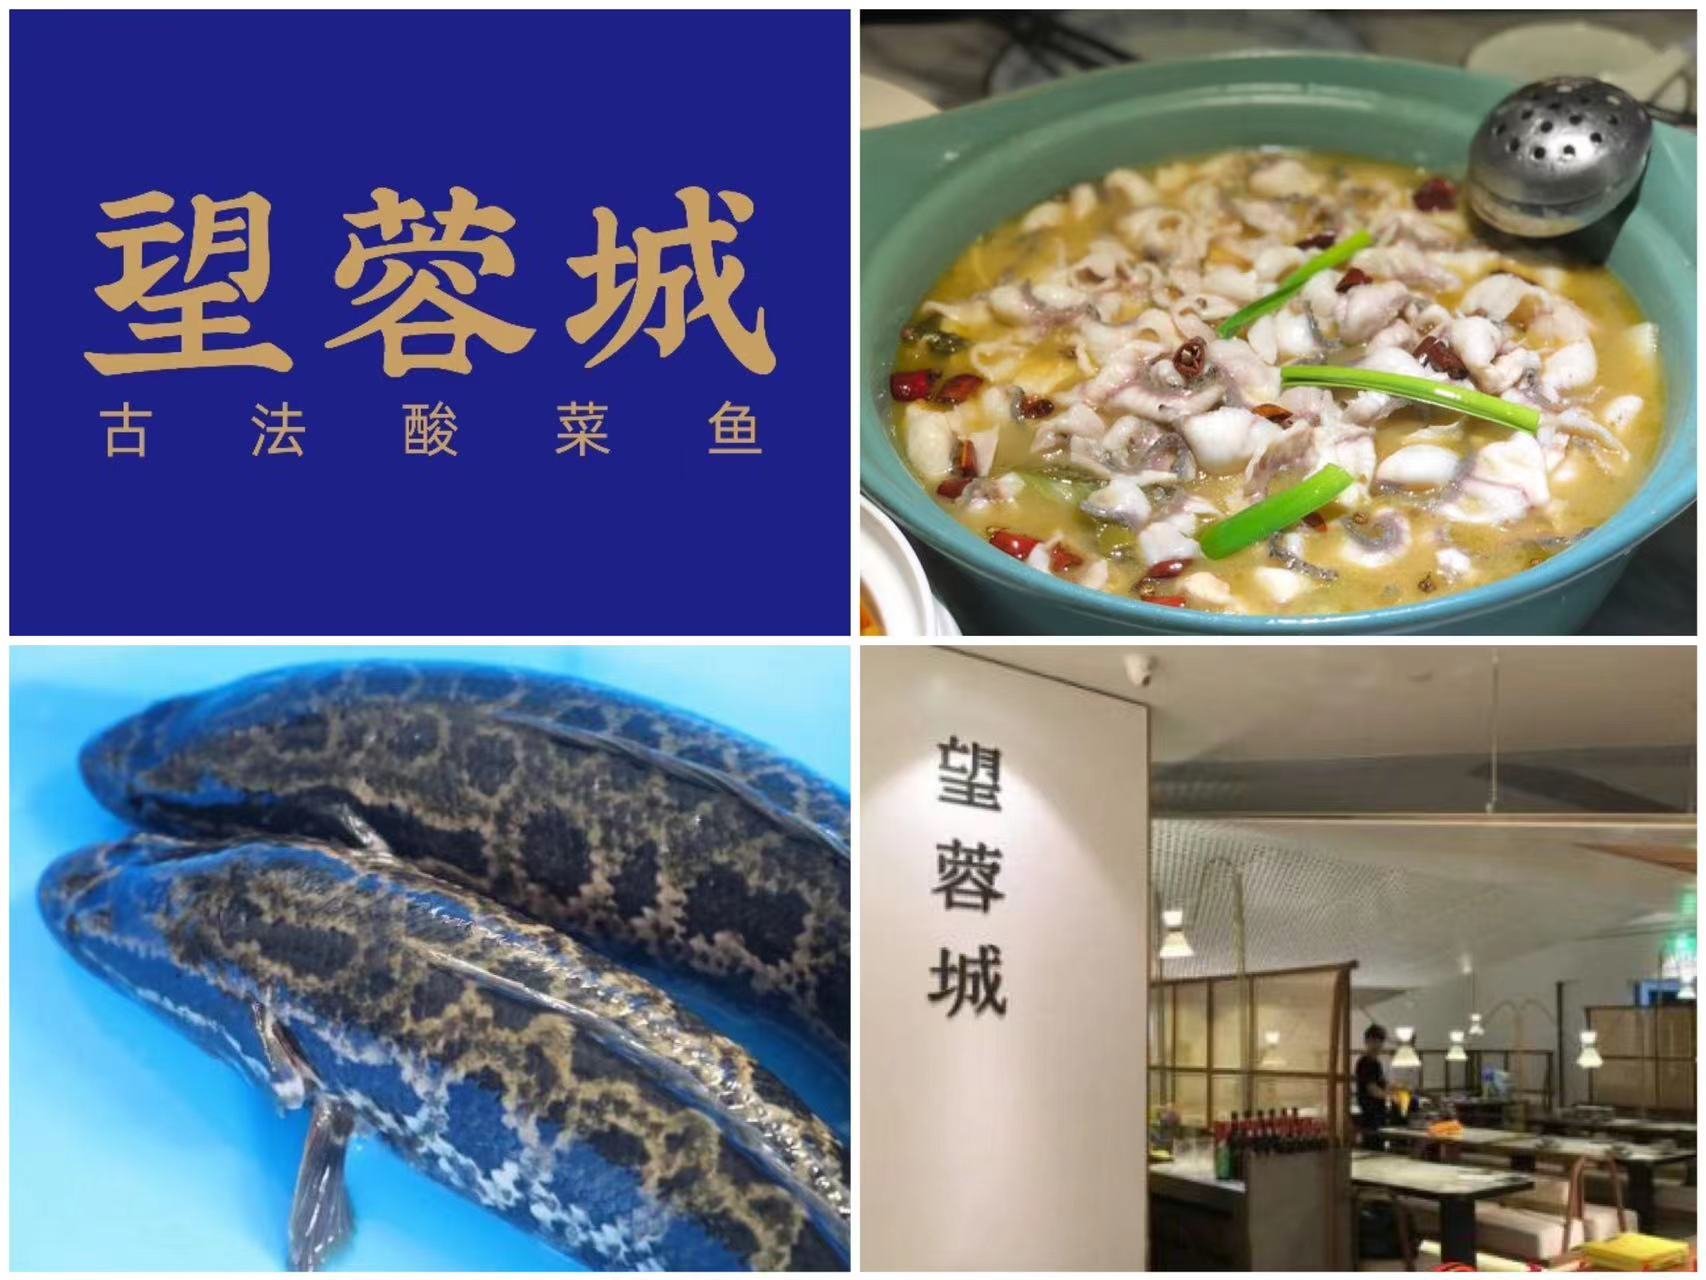 Zhou Yan's favourite restaurant in China: 望蓉城 [Wàngróngchéng], which serves snakehead fish fillets in a Chinese sauerkraut soup.